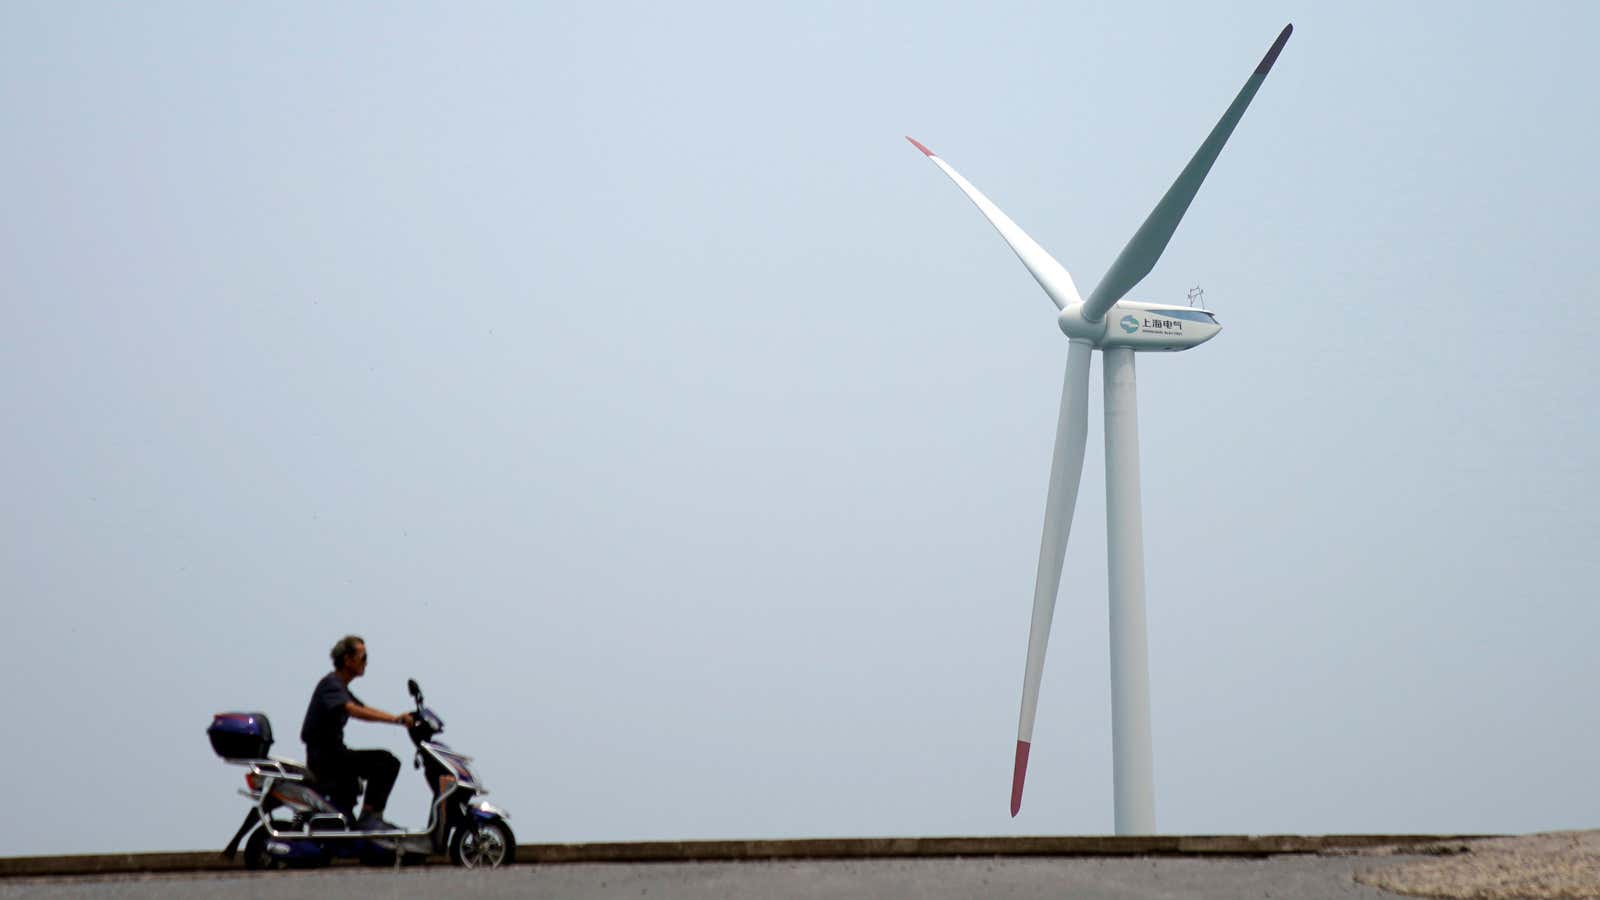 China’s new Five Year Plan calls for a “major push” on clean energy but misses opportunities to curb emissions.